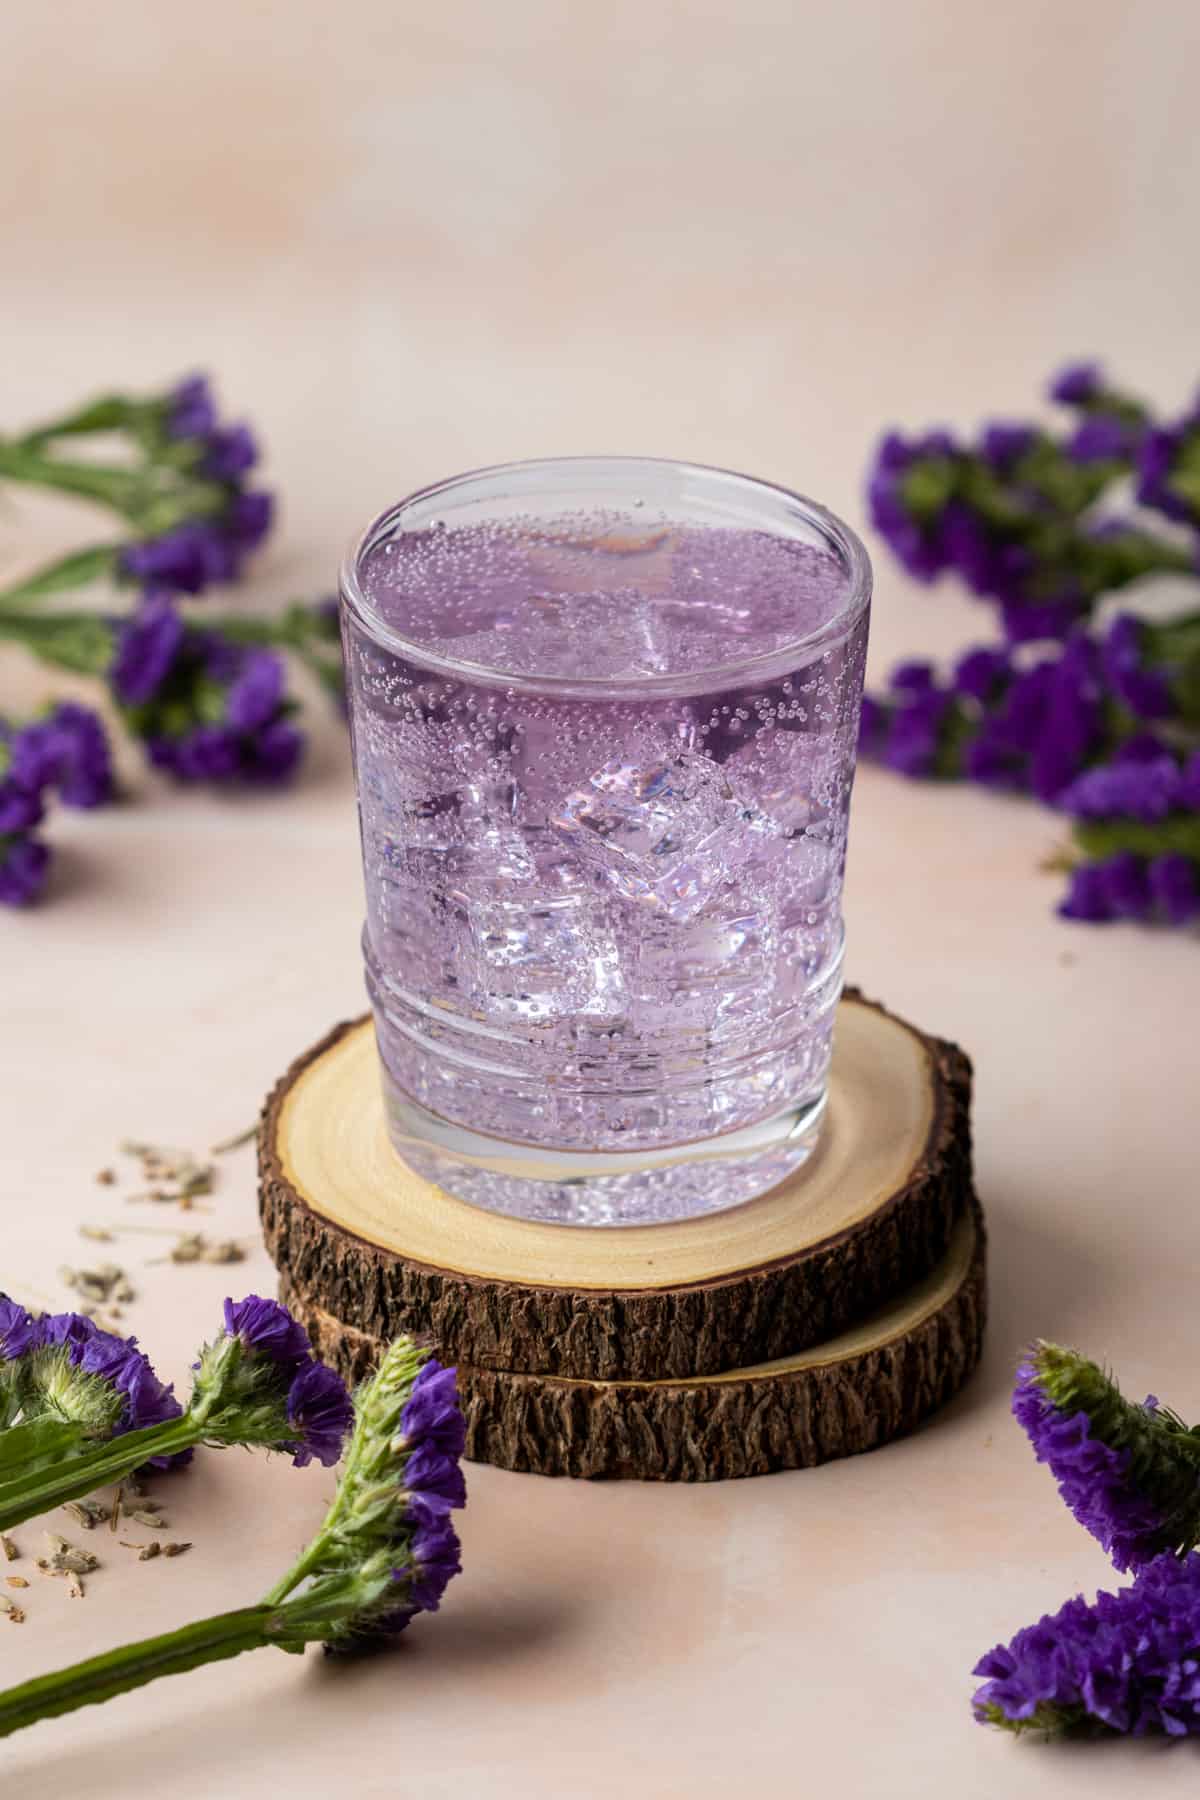 Empress gin and and tonic on two wooden coasters with purple flowers scattered around.